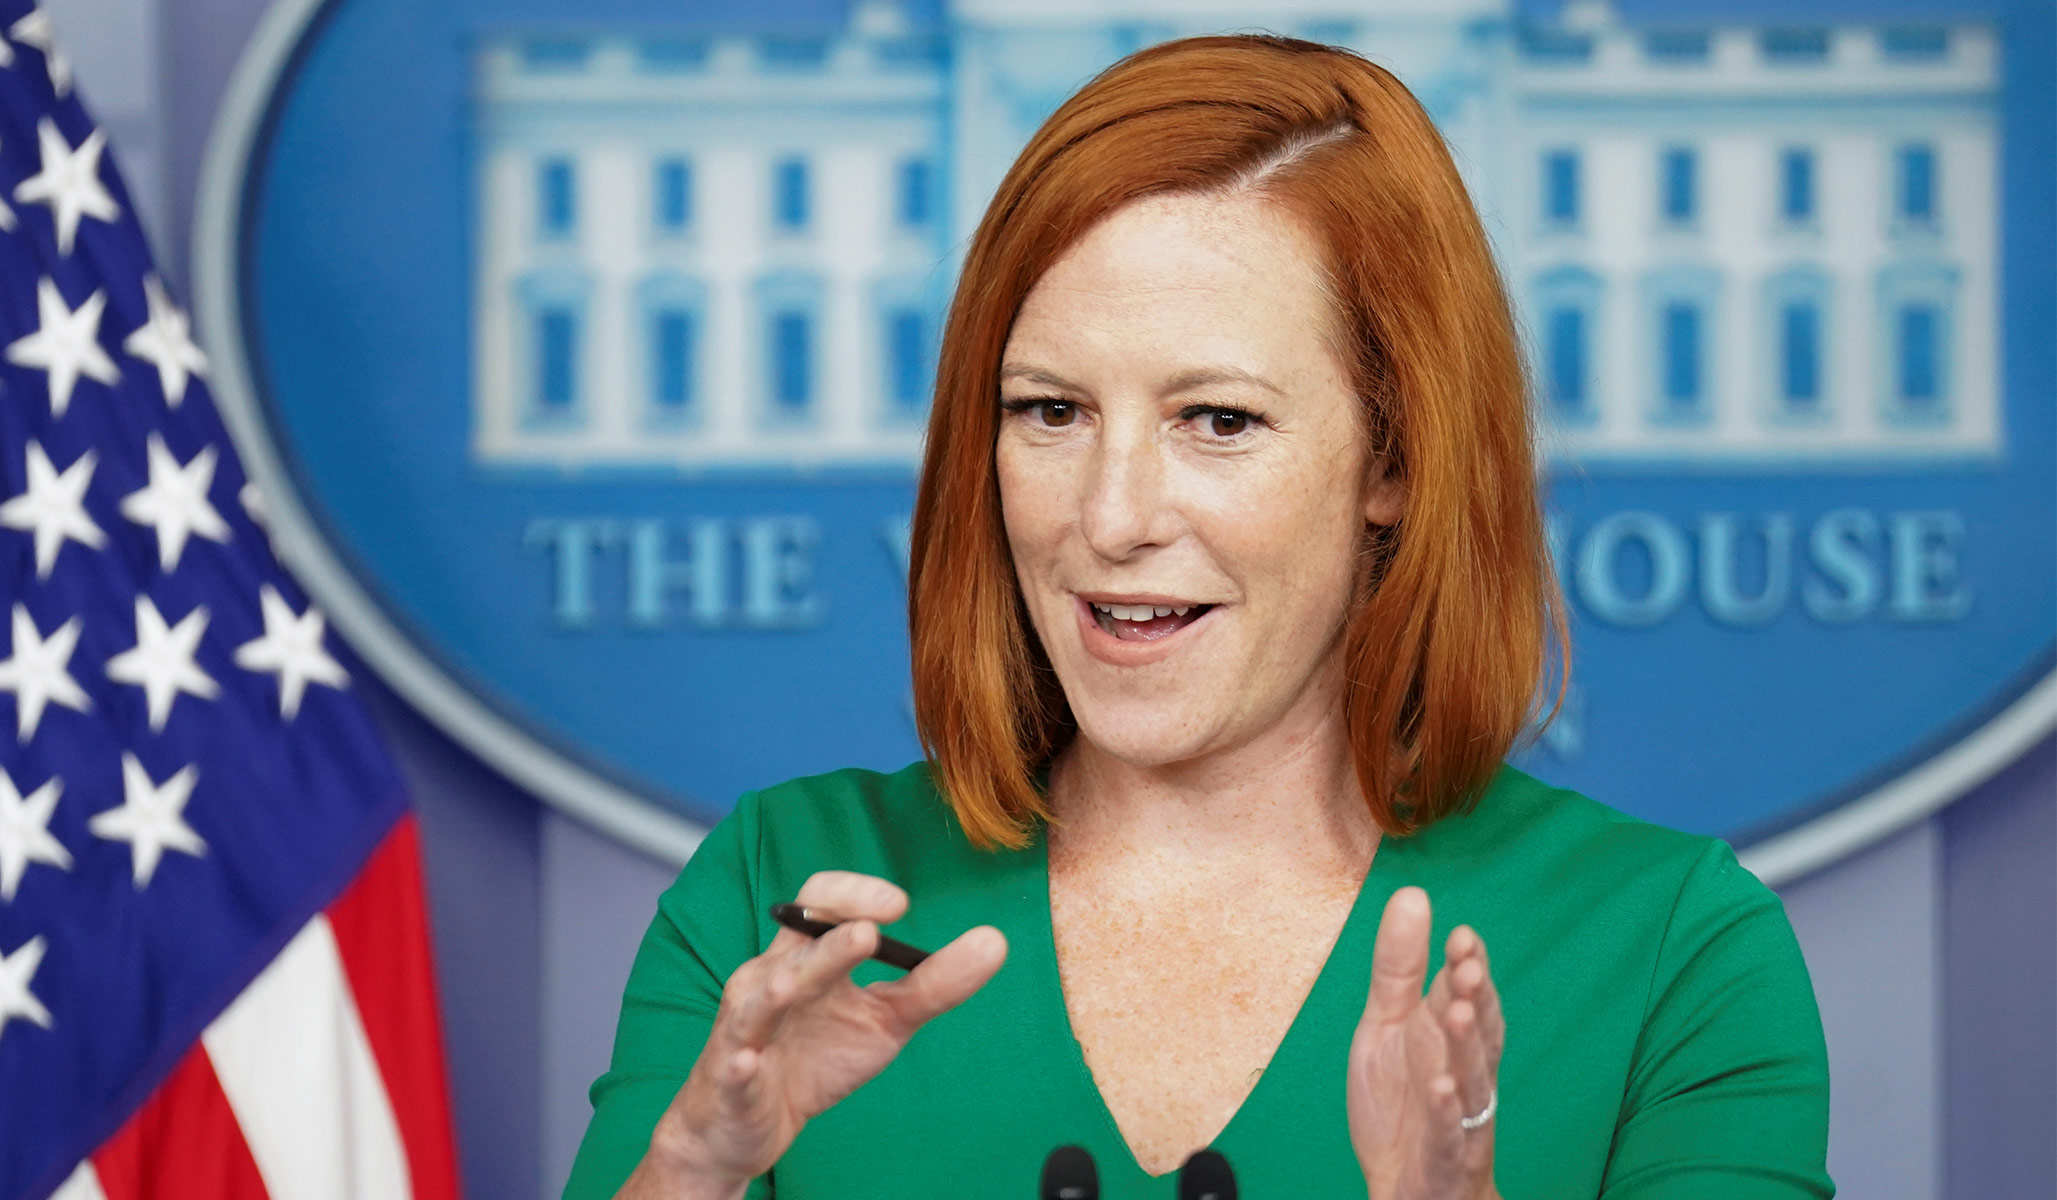 jen-psaki-chief-of-staff-ron-klain-didn-t-mean-to-say-we-have-high